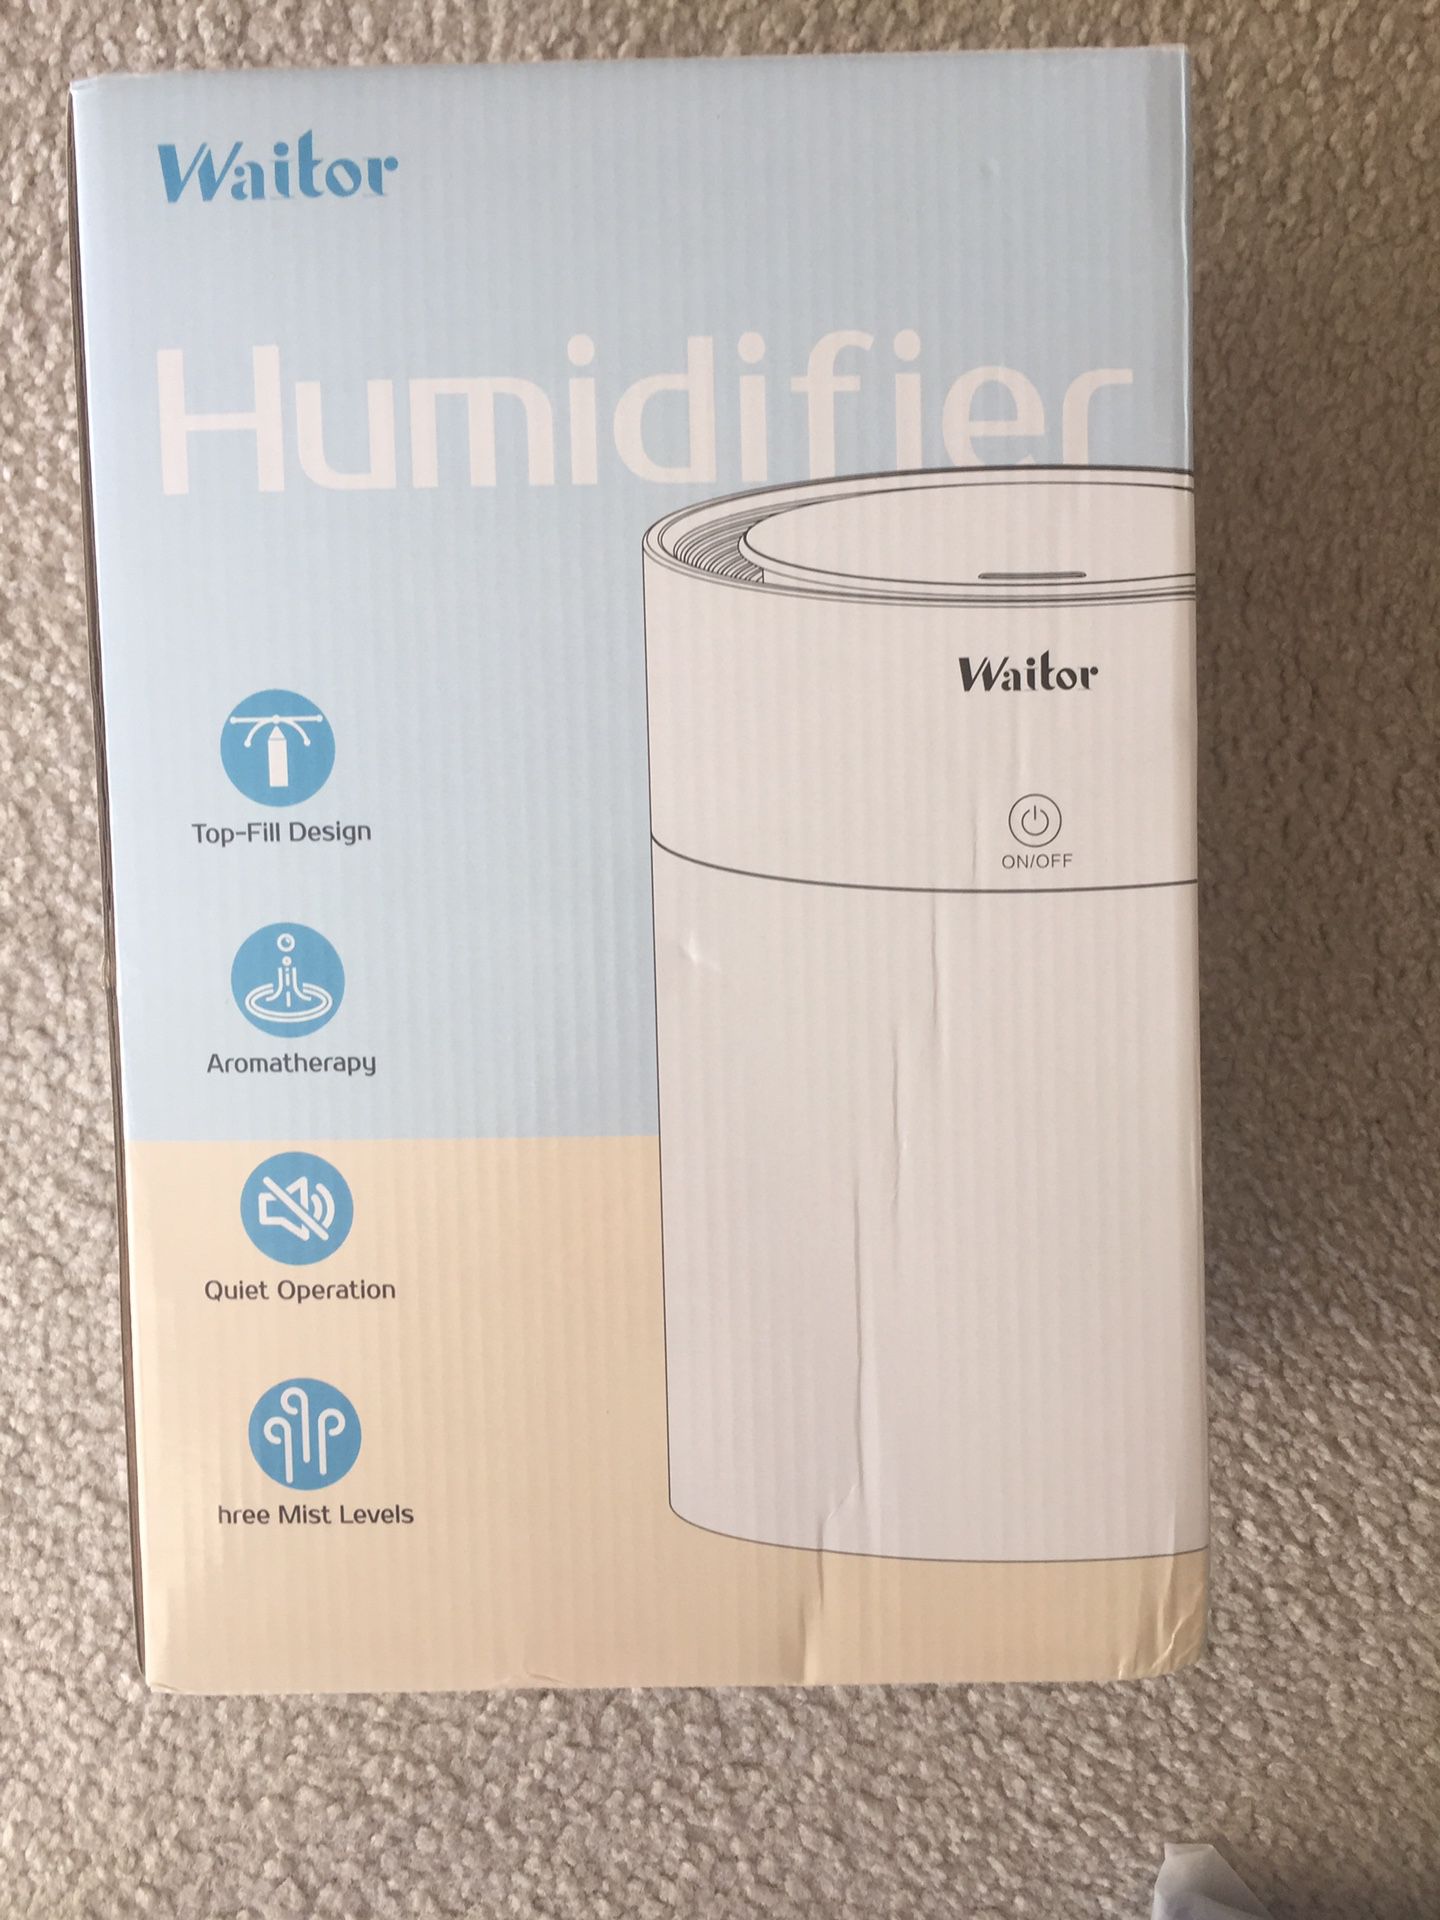 Brand new Waitor Humidifiers Top Fill Ultrasonic for bedroom Baby Room 3L Quiet Essential Oil Humidifier with Adjustable Mist Output Auto Shut Off